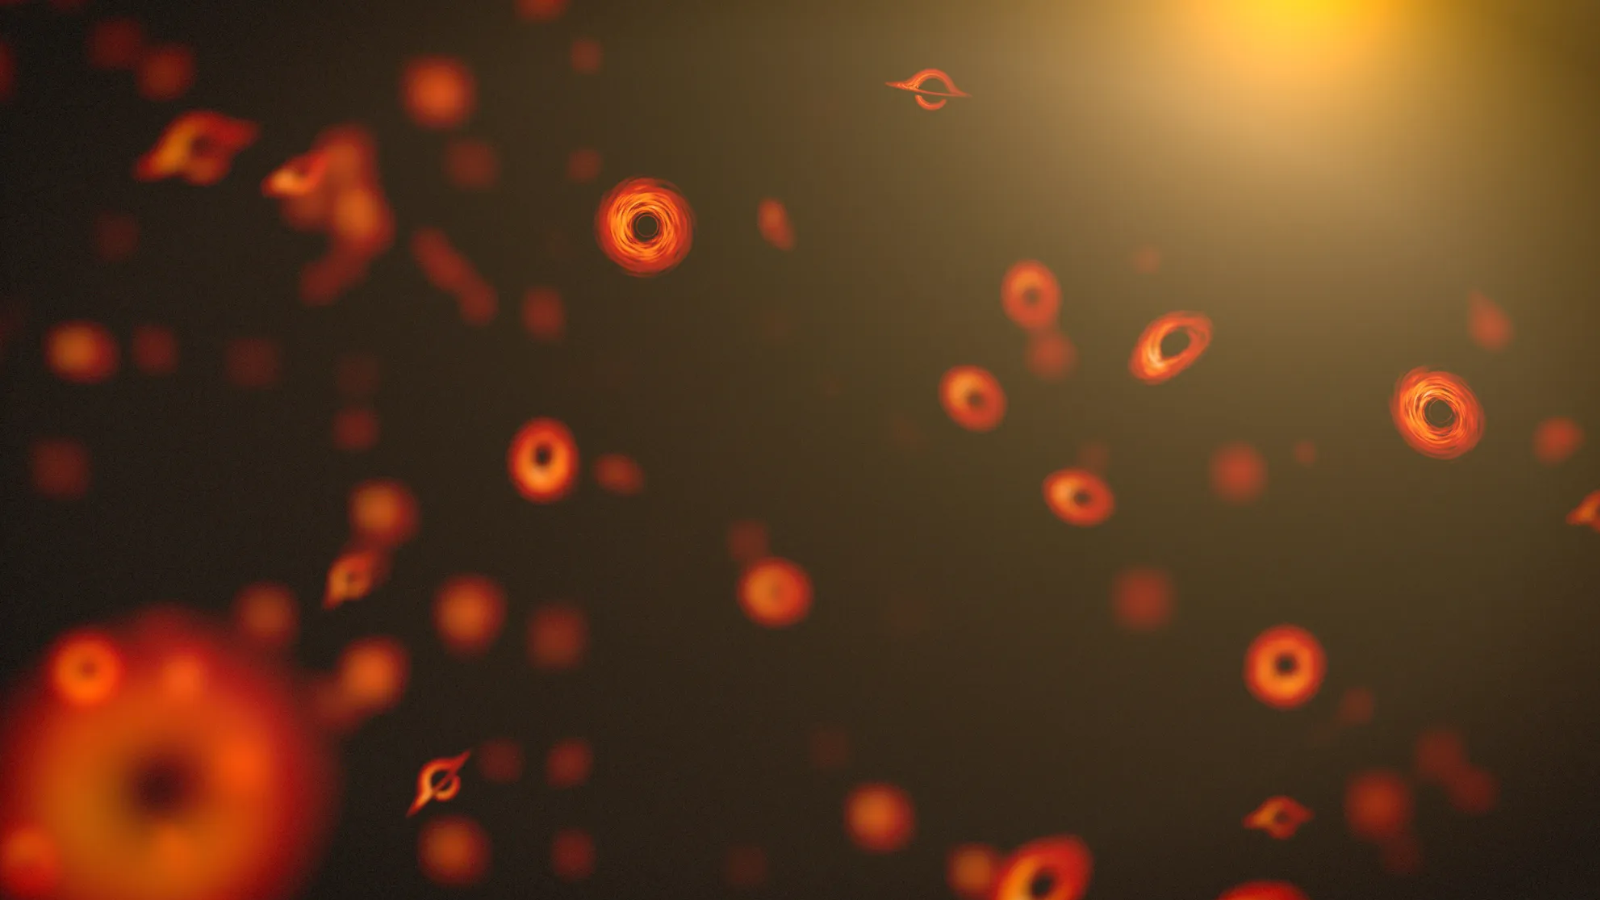 Lots of small black holes with bright orange disks around them floating around, looking kind of like blood cells.